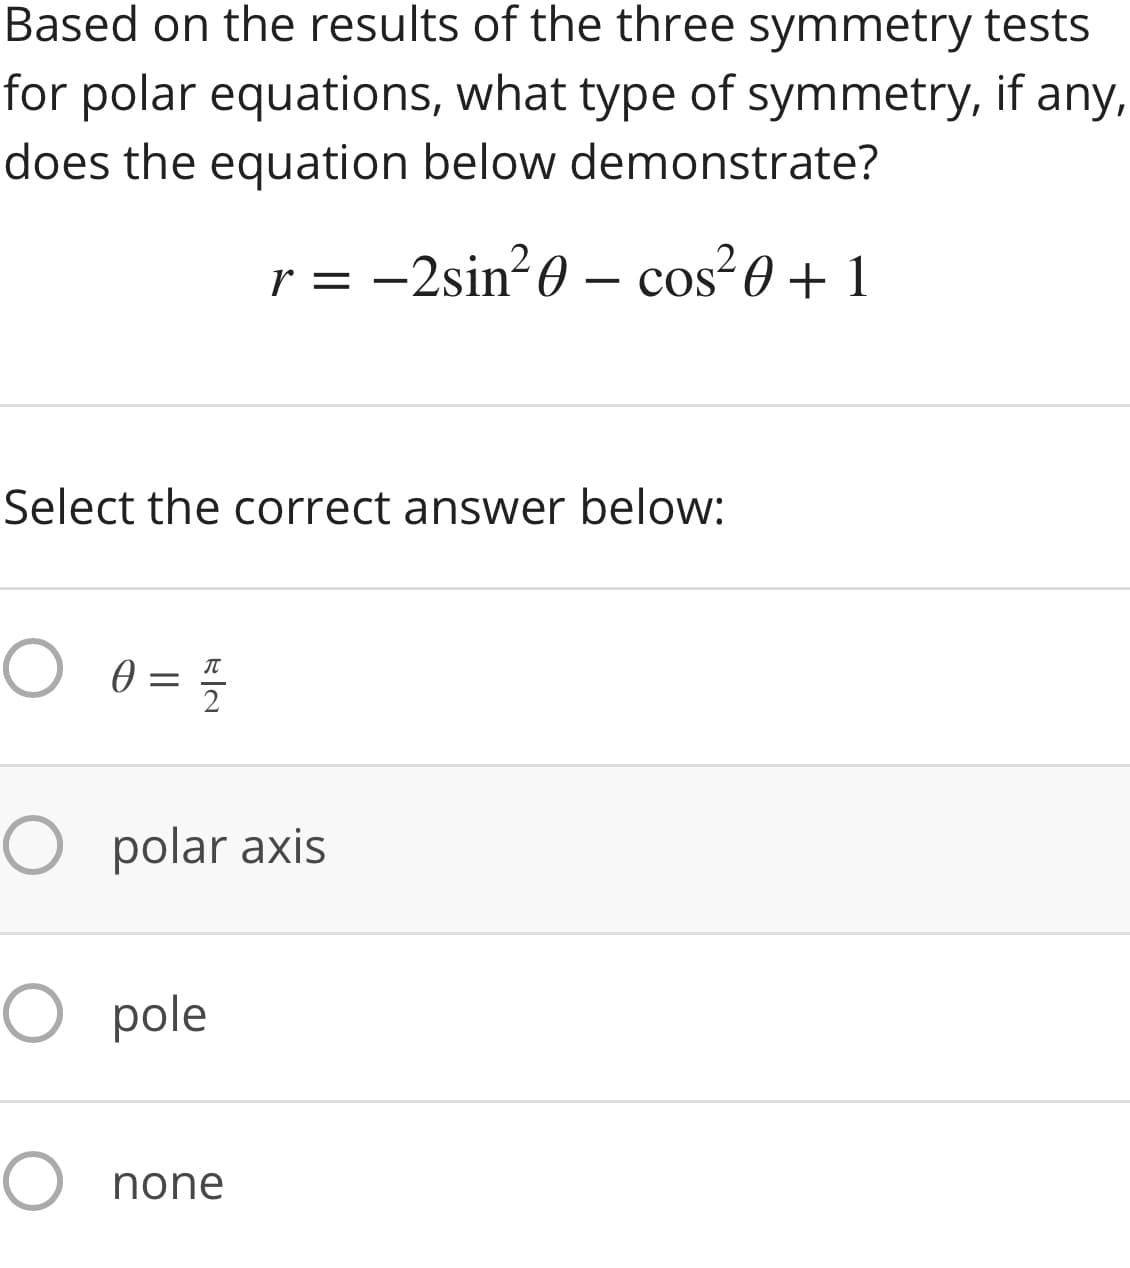 Based on the results of the three symmetry tests
for polar equations, what type of symmetry, if any,
does the equation below demonstrate?
r = -2sin-0 – cos?0 + 1
CoS
Select the correct answer below:
2
O polar axis
O pole
O none
